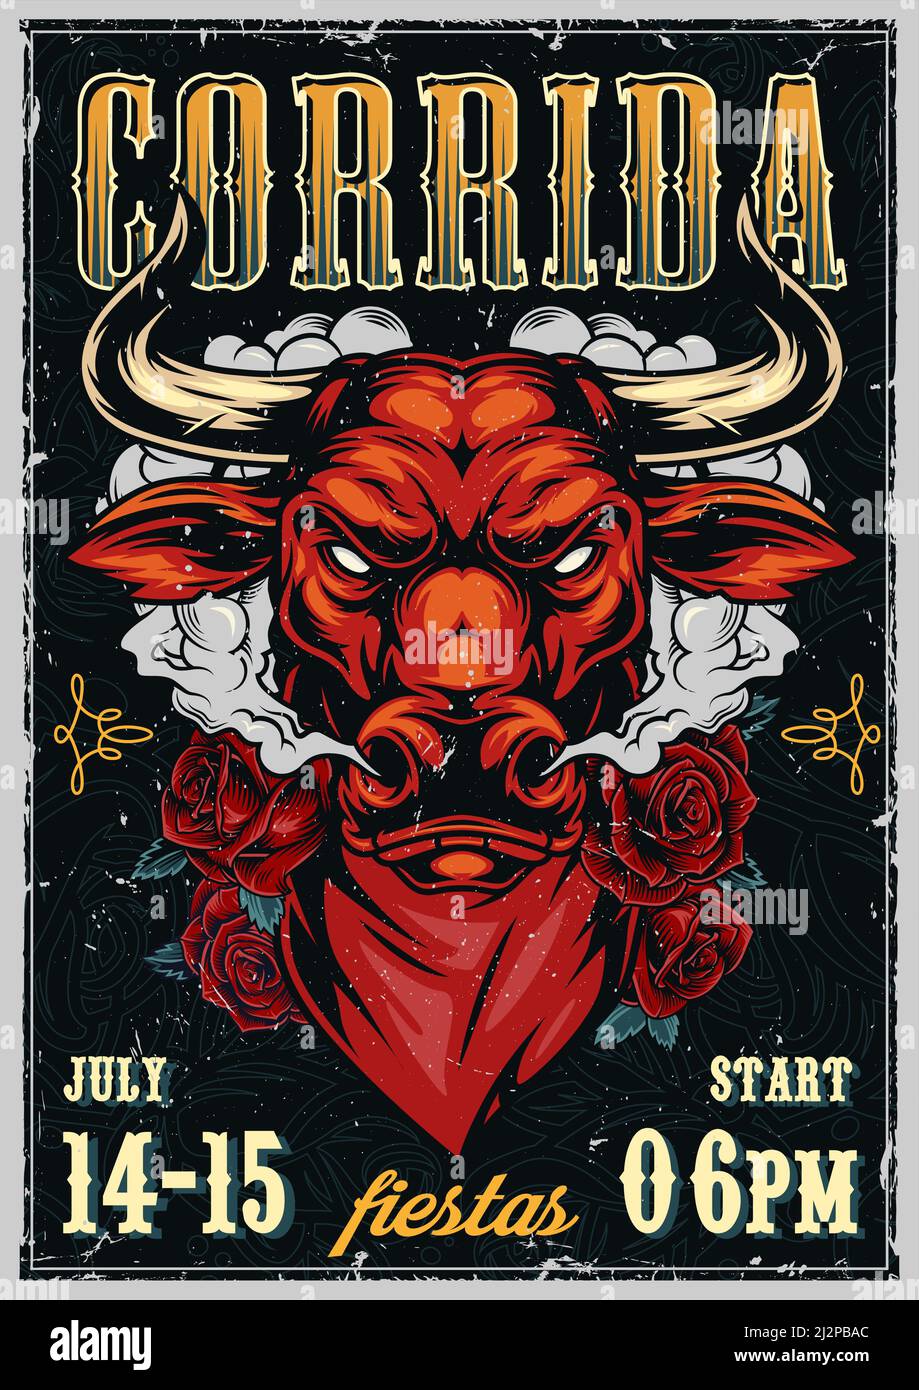 Party Vietnam #stoli #redbull #booze Poster by Tim Topping - Mobile Prints